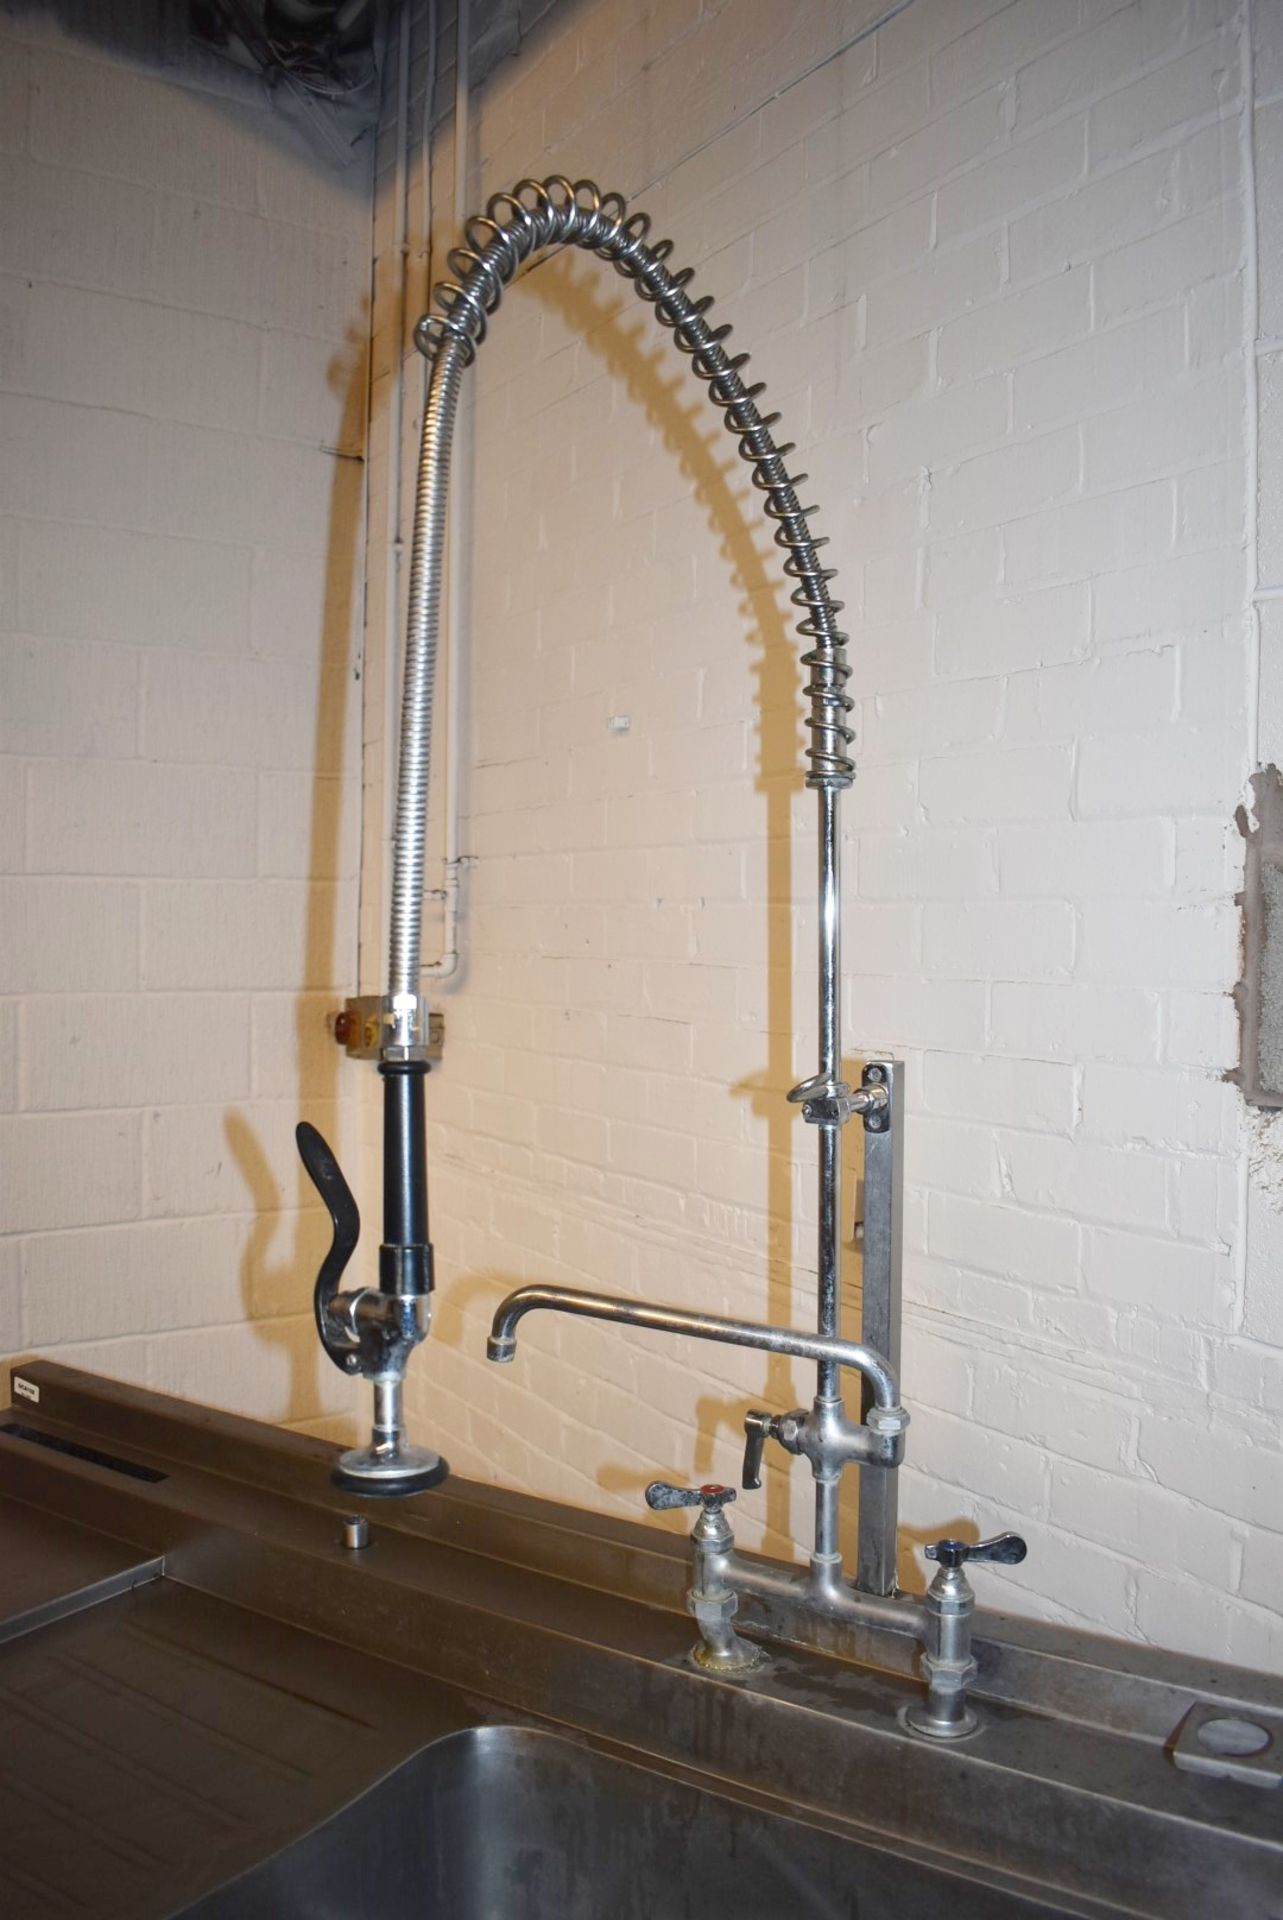 1 x Stainless Steel Single Bowl Sink Unit With Mixer Taps, Spray Hose Tap, Drainer and Bin Chute - Image 3 of 10